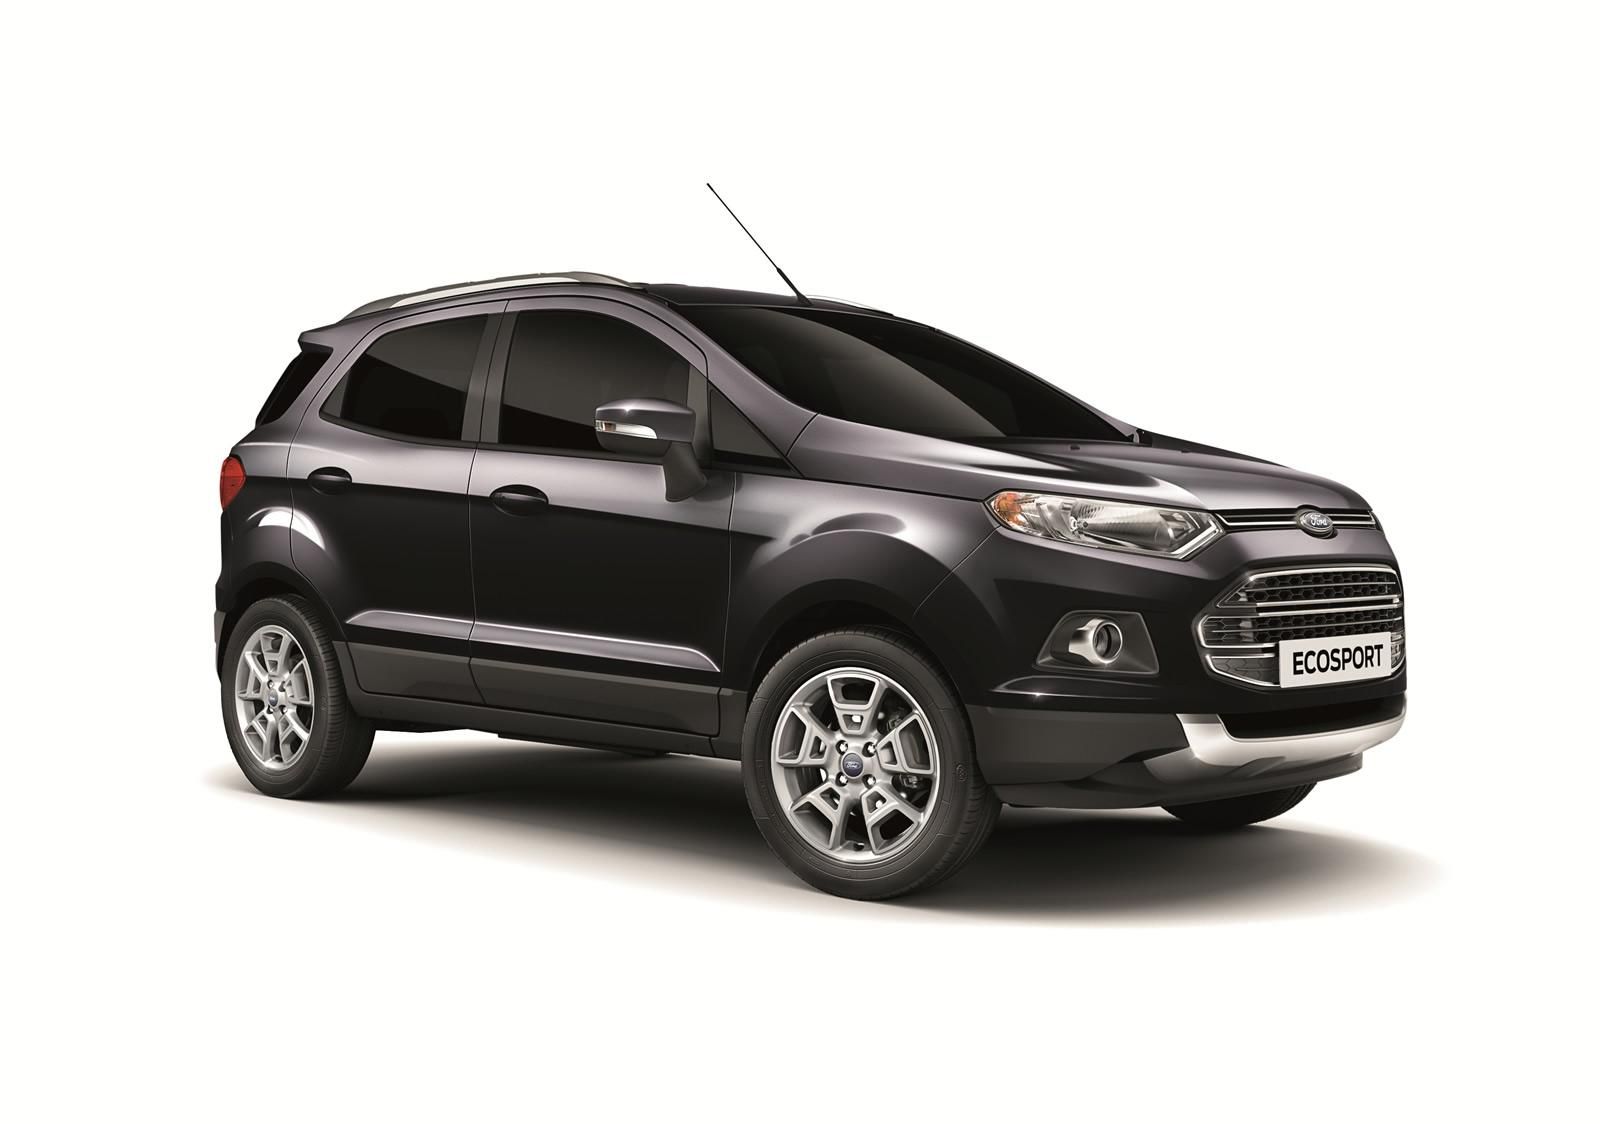 FORD ECOSPORT LMTED EDTON RESM GALERS